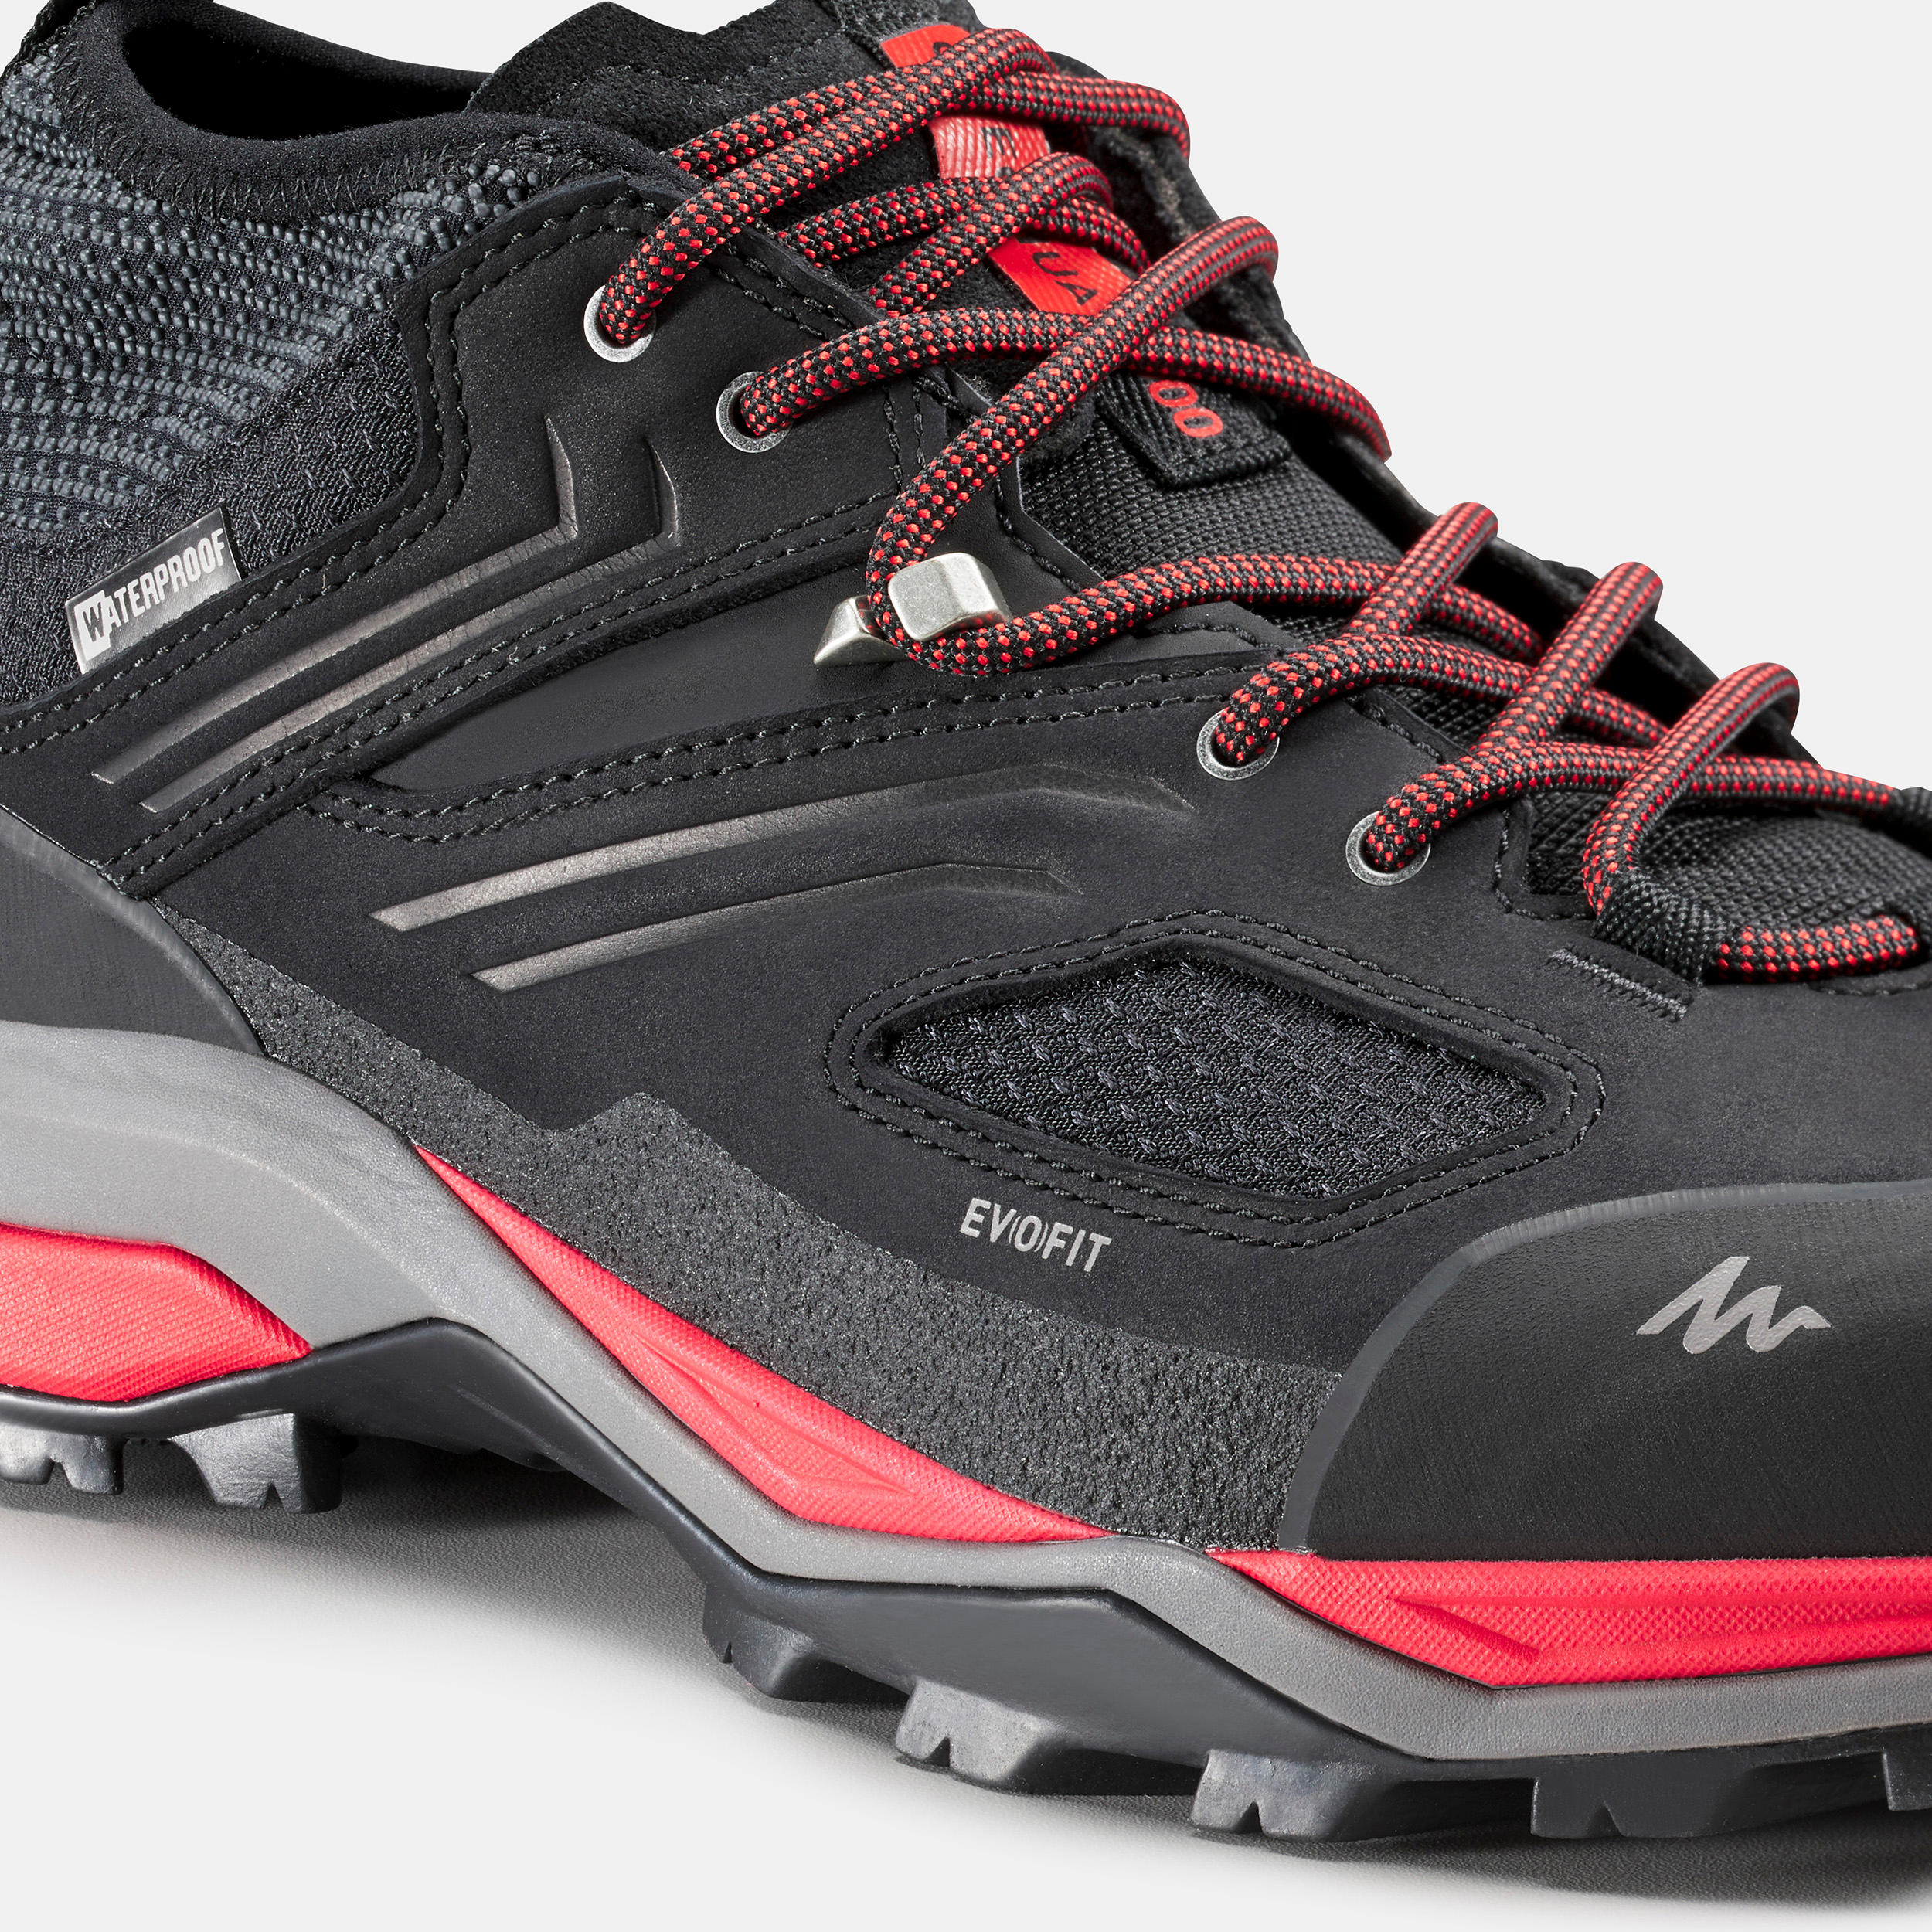 Men's waterproof mountain hiking shoes - MH900 - Black/Red 6/6